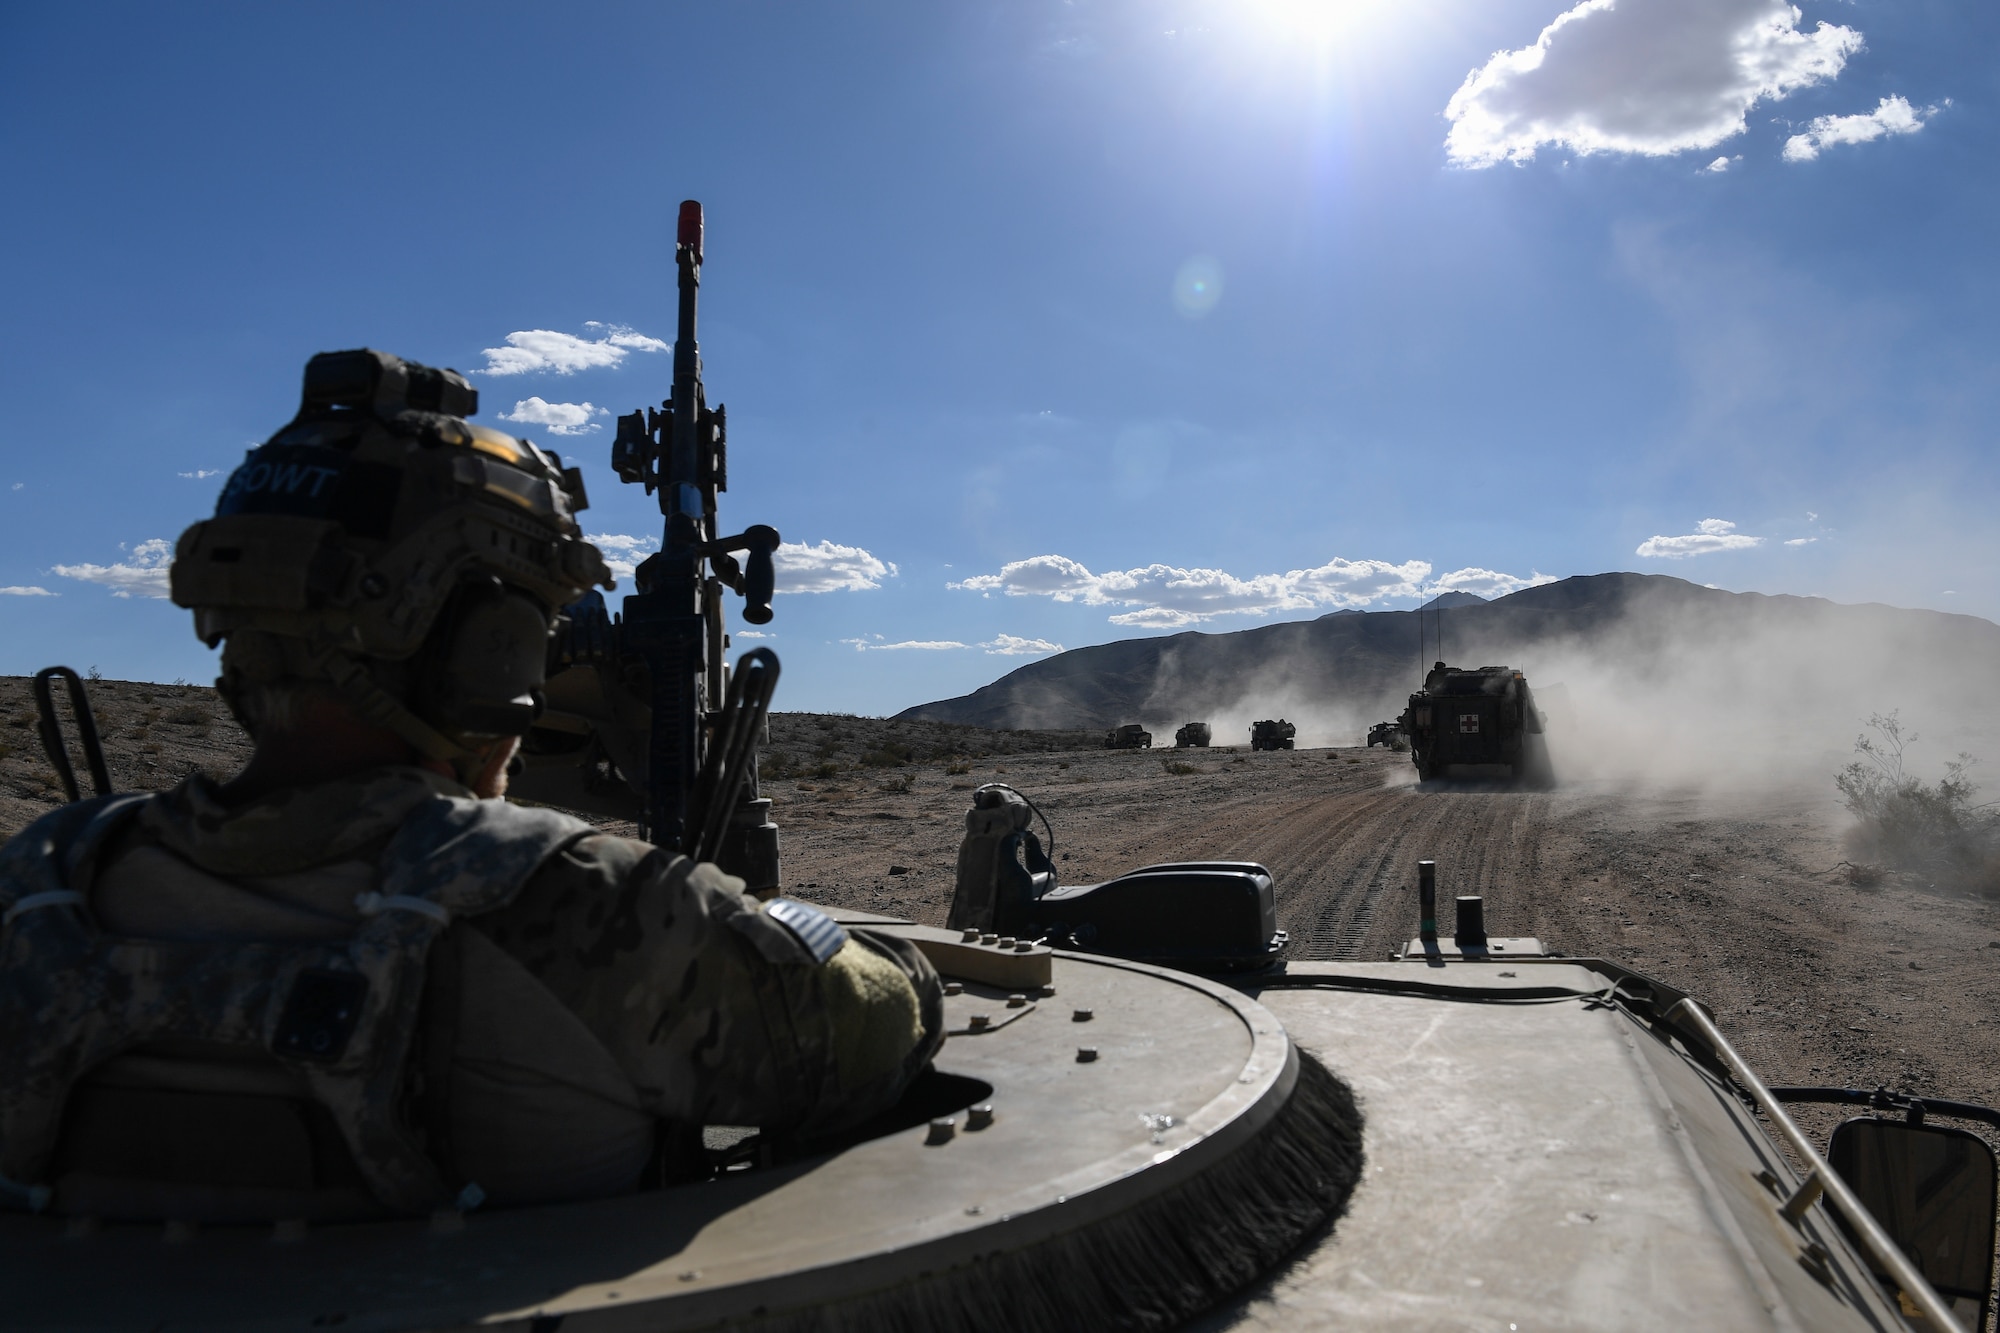 A Special Tactics Airman from the 21st Special Tactics Squadron from Pope Army Airfield, Fort Bragg, North Carolina, mans an M-240 machine gun and watches for potential threats on a convoy to a simulated attack on a city during a scenario as part of NTC 18-10 at Fort Irwin, California, Sept. 6, 2018.